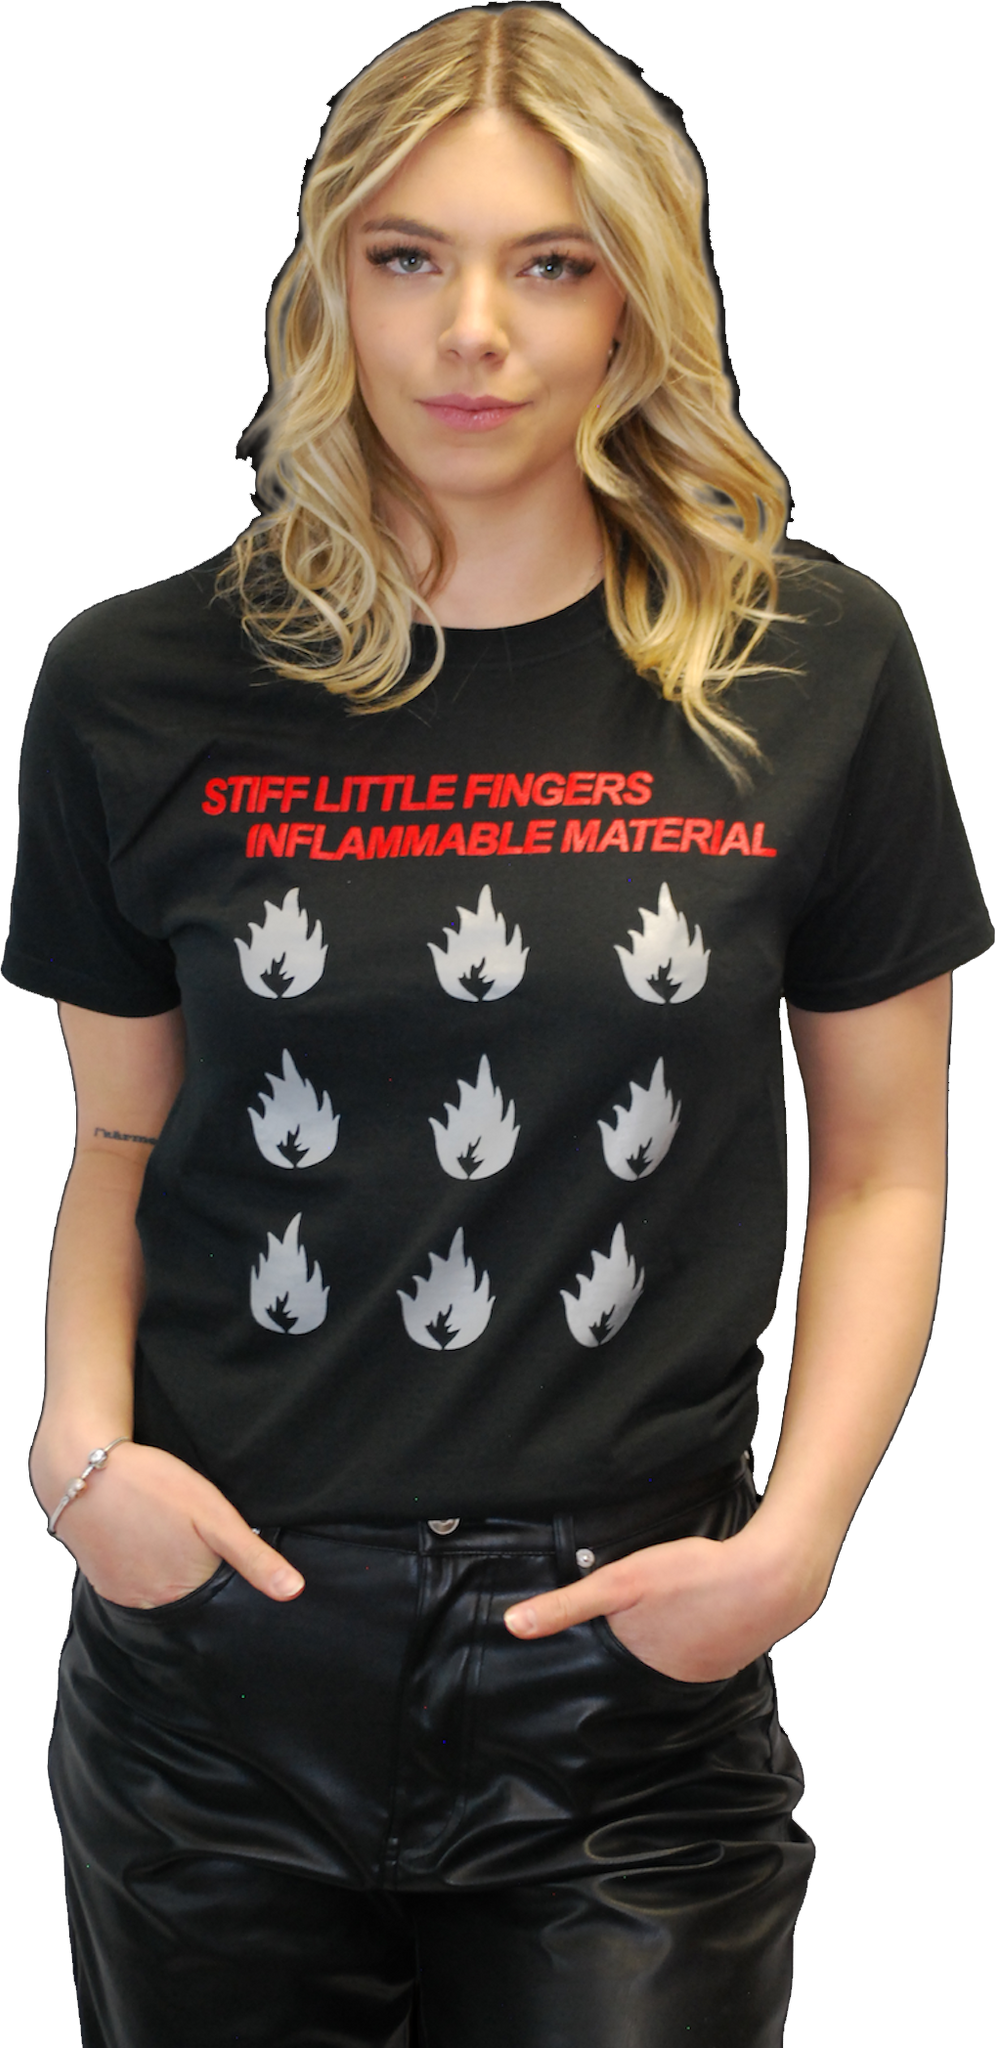 STIFF LITTLE FINGERS "INFLAMMABLE MATERIAL" T-SHIRT